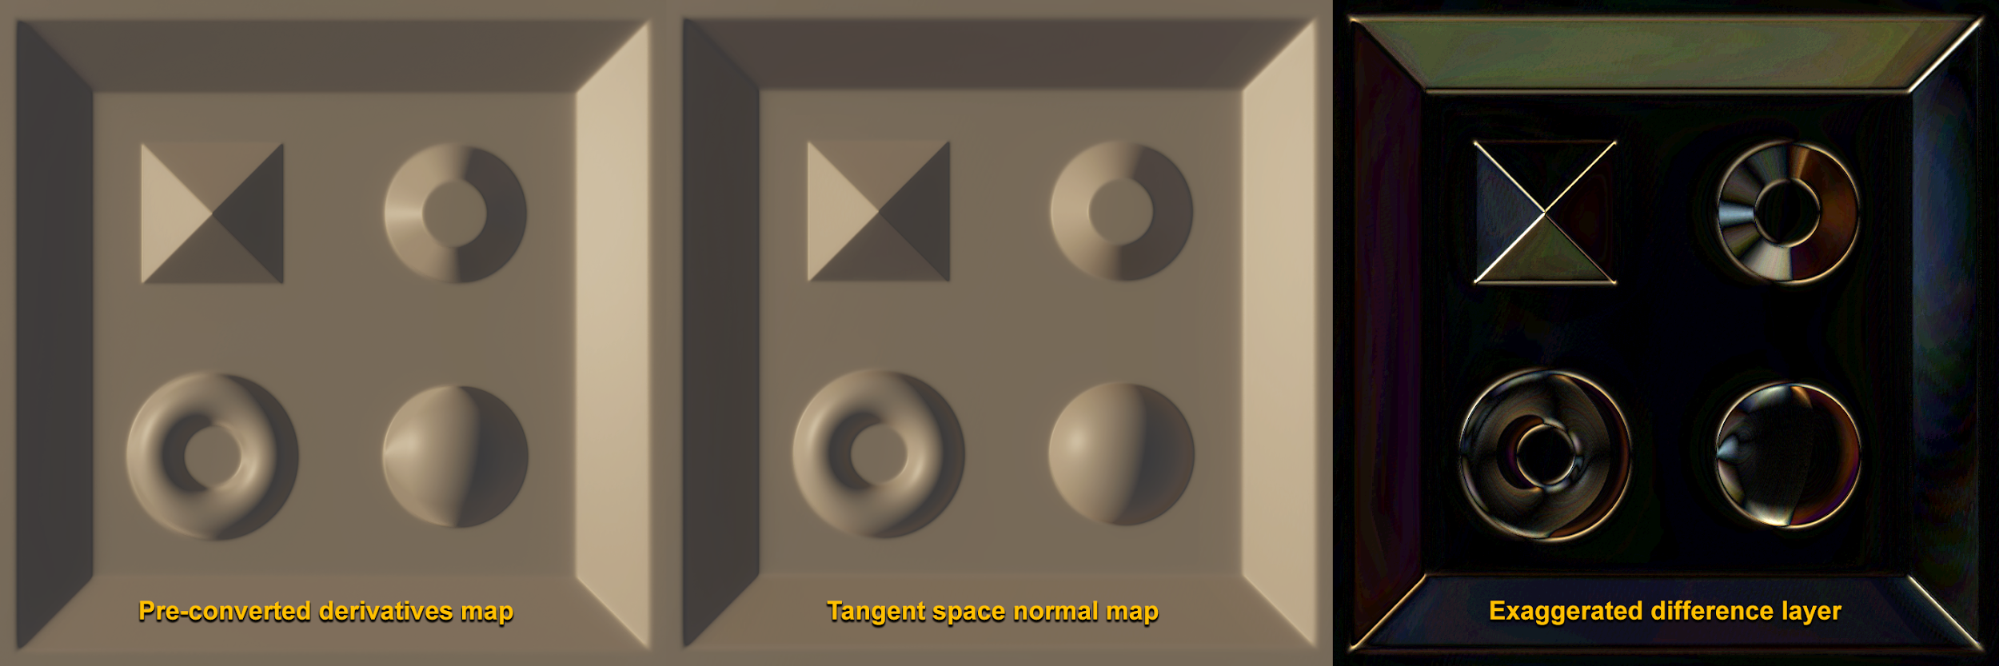 Stress test differences between pre-converted derivatives and tangent space normal map. Notice that the Spherical bump exhibits some artifact due to the 45-degree clamping in the pre-converted derivatives map.